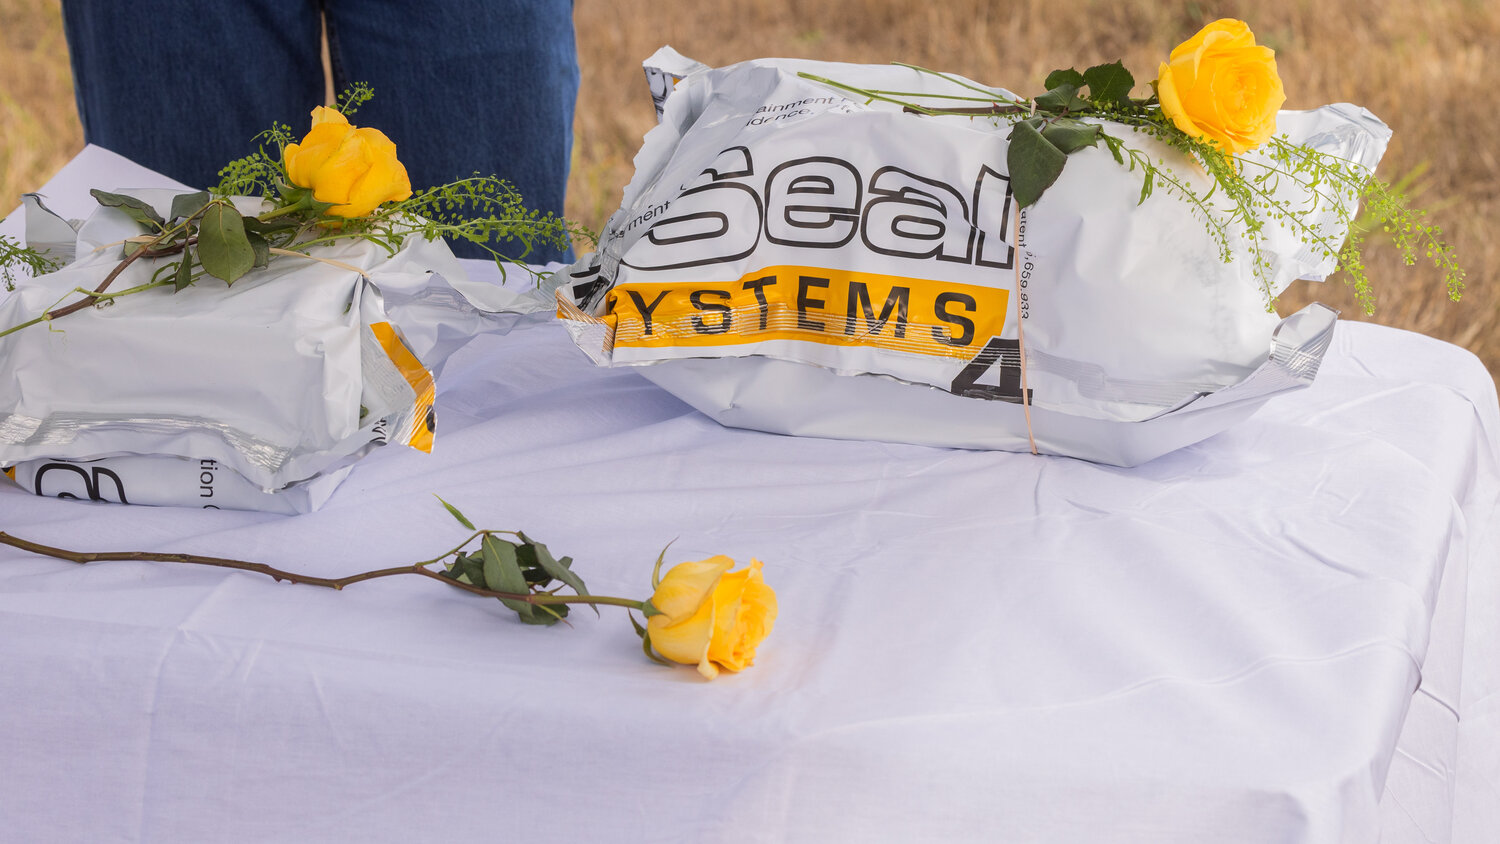 Flowers sit on unclaimed remains during a ceremony in Chehalis on Thursday, Sept. 28.